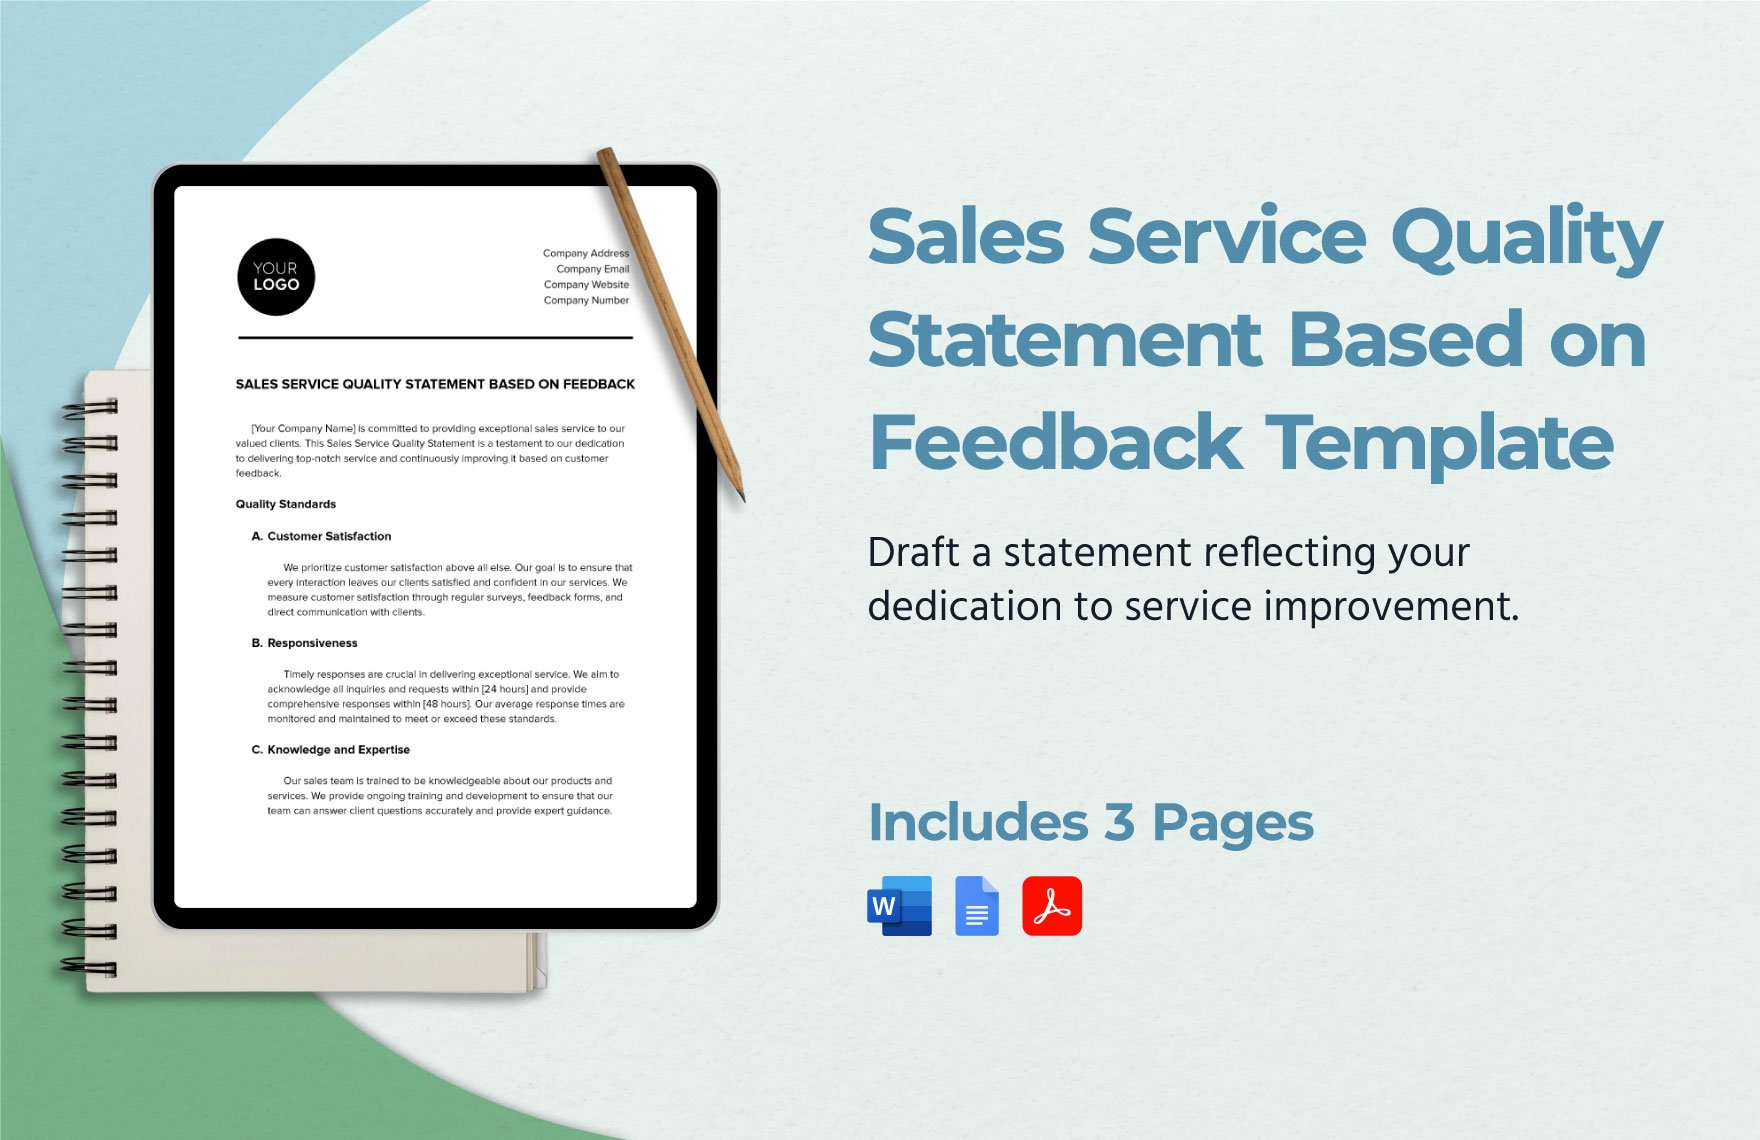 Sales Service Quality Statement Based on Feedback Template